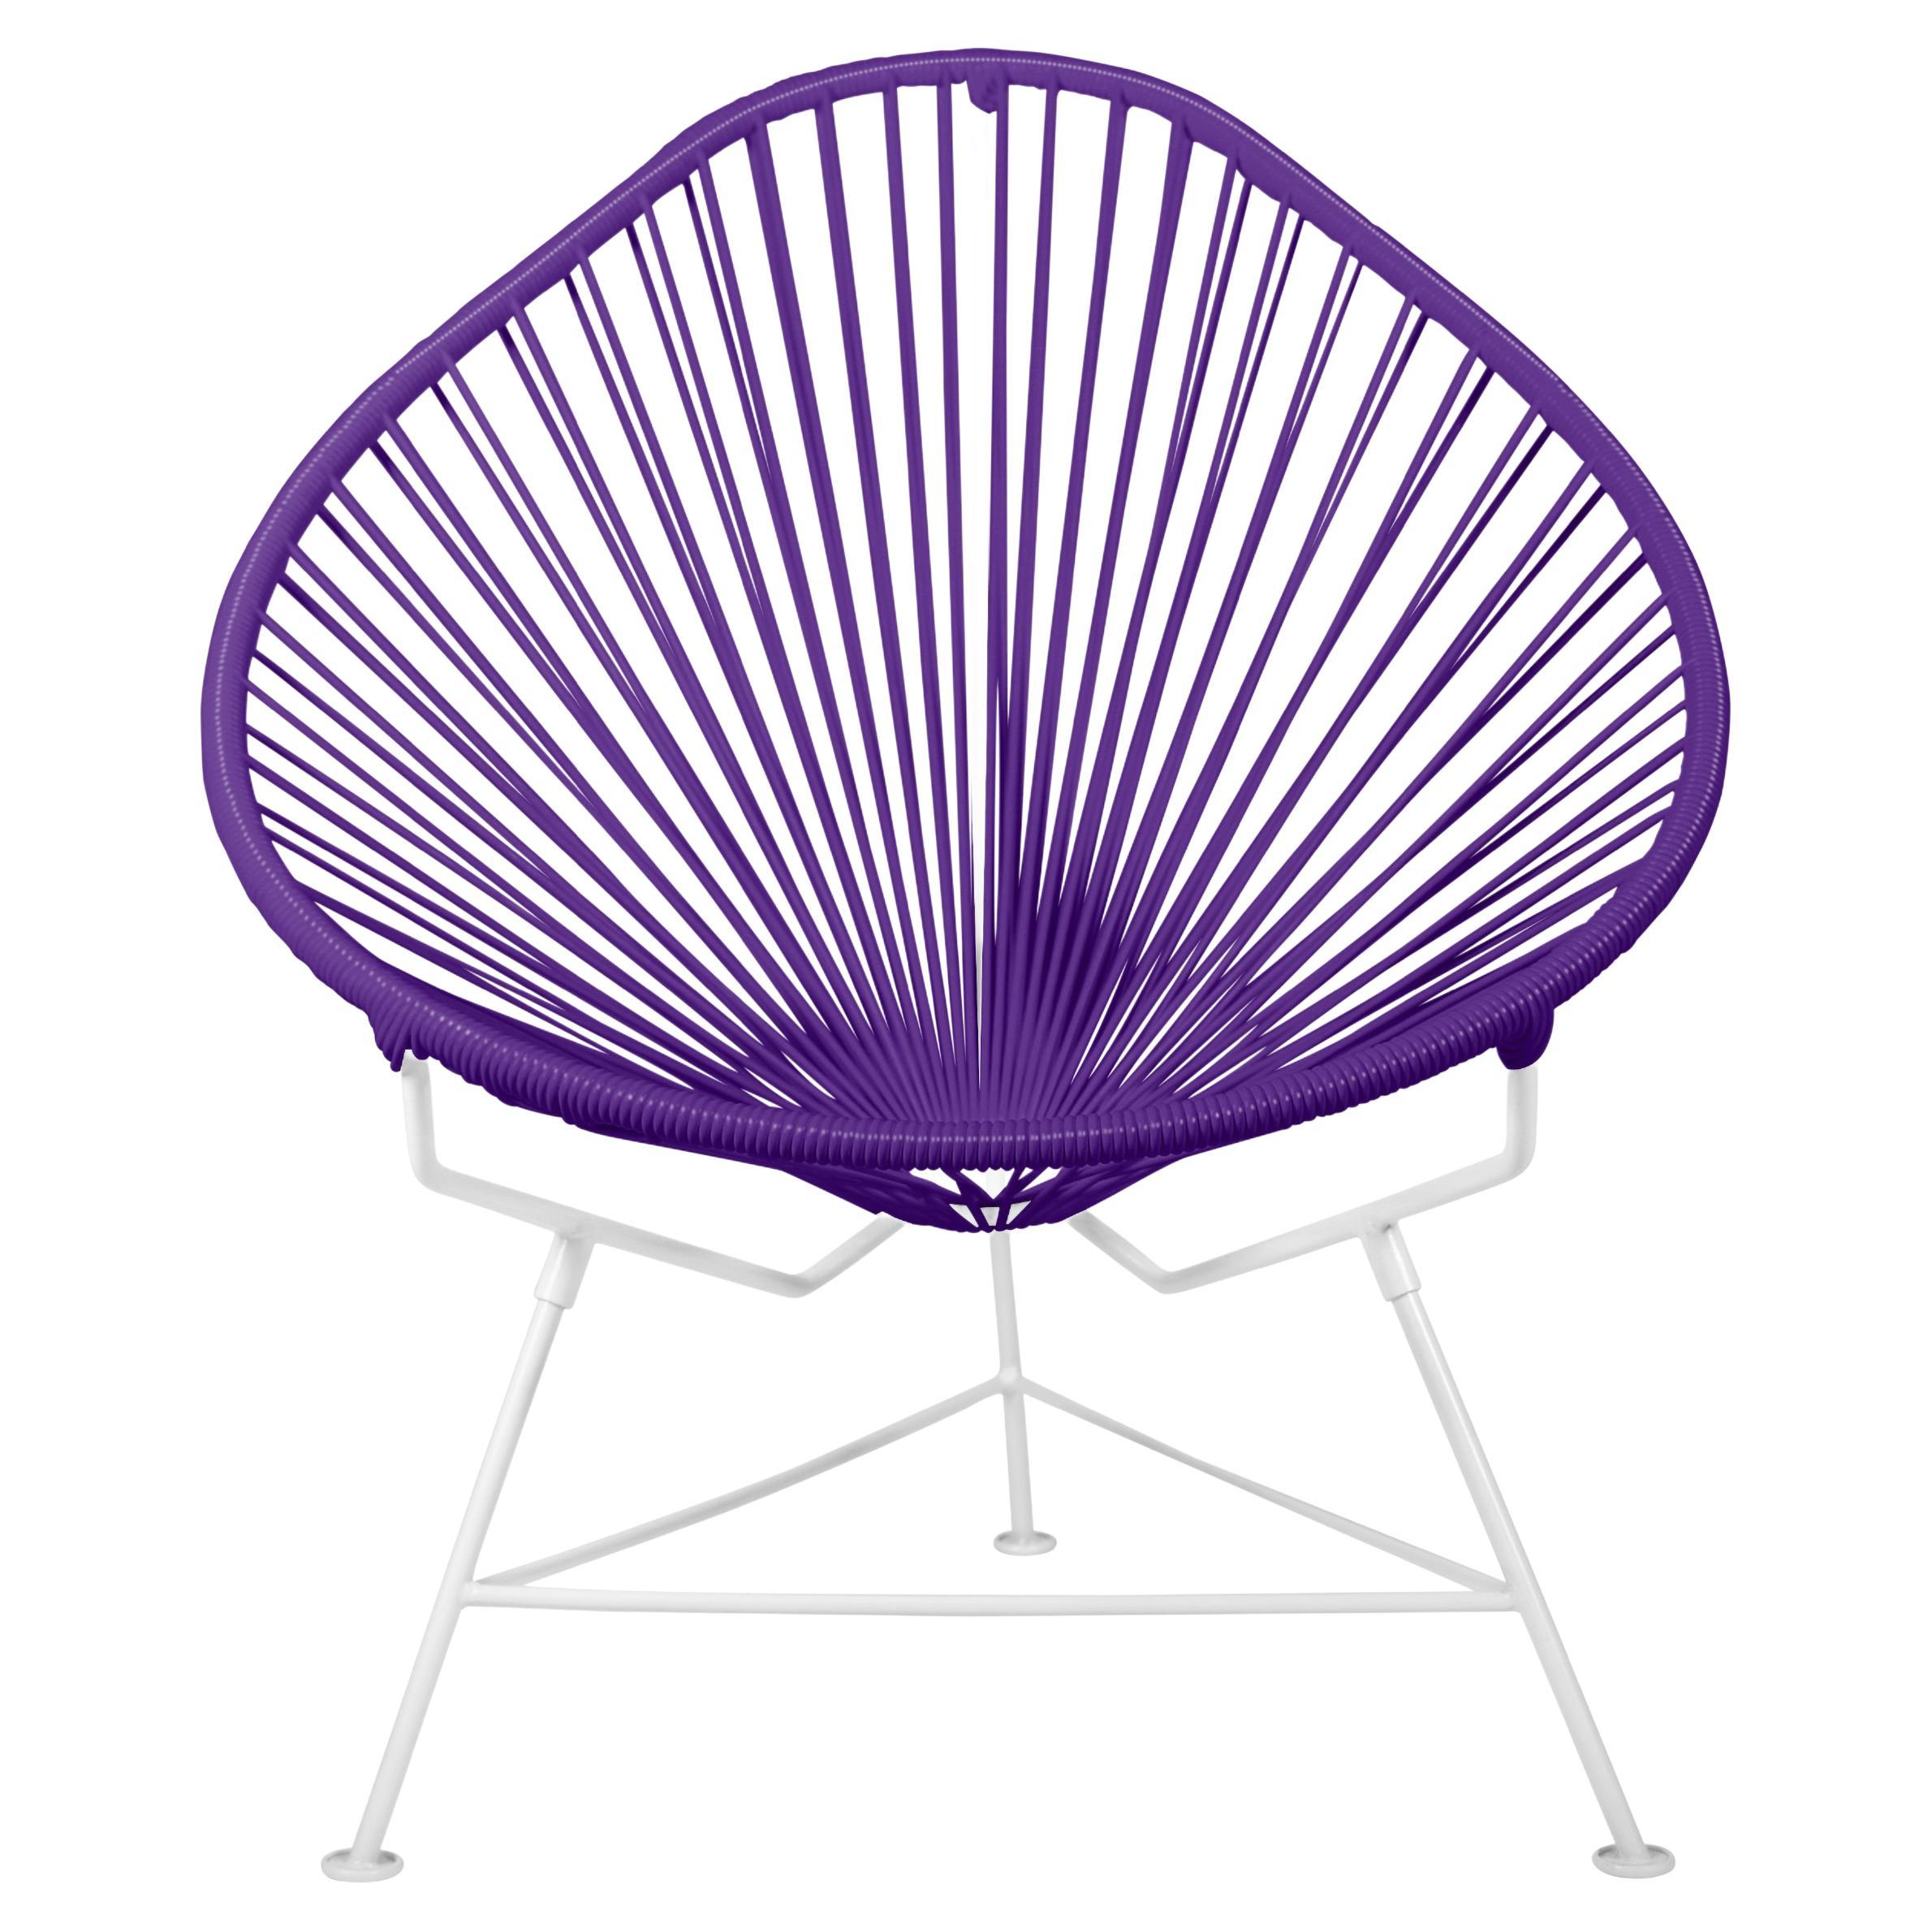 Innit Designs Acapulco Chair Purple Weave on White Frame